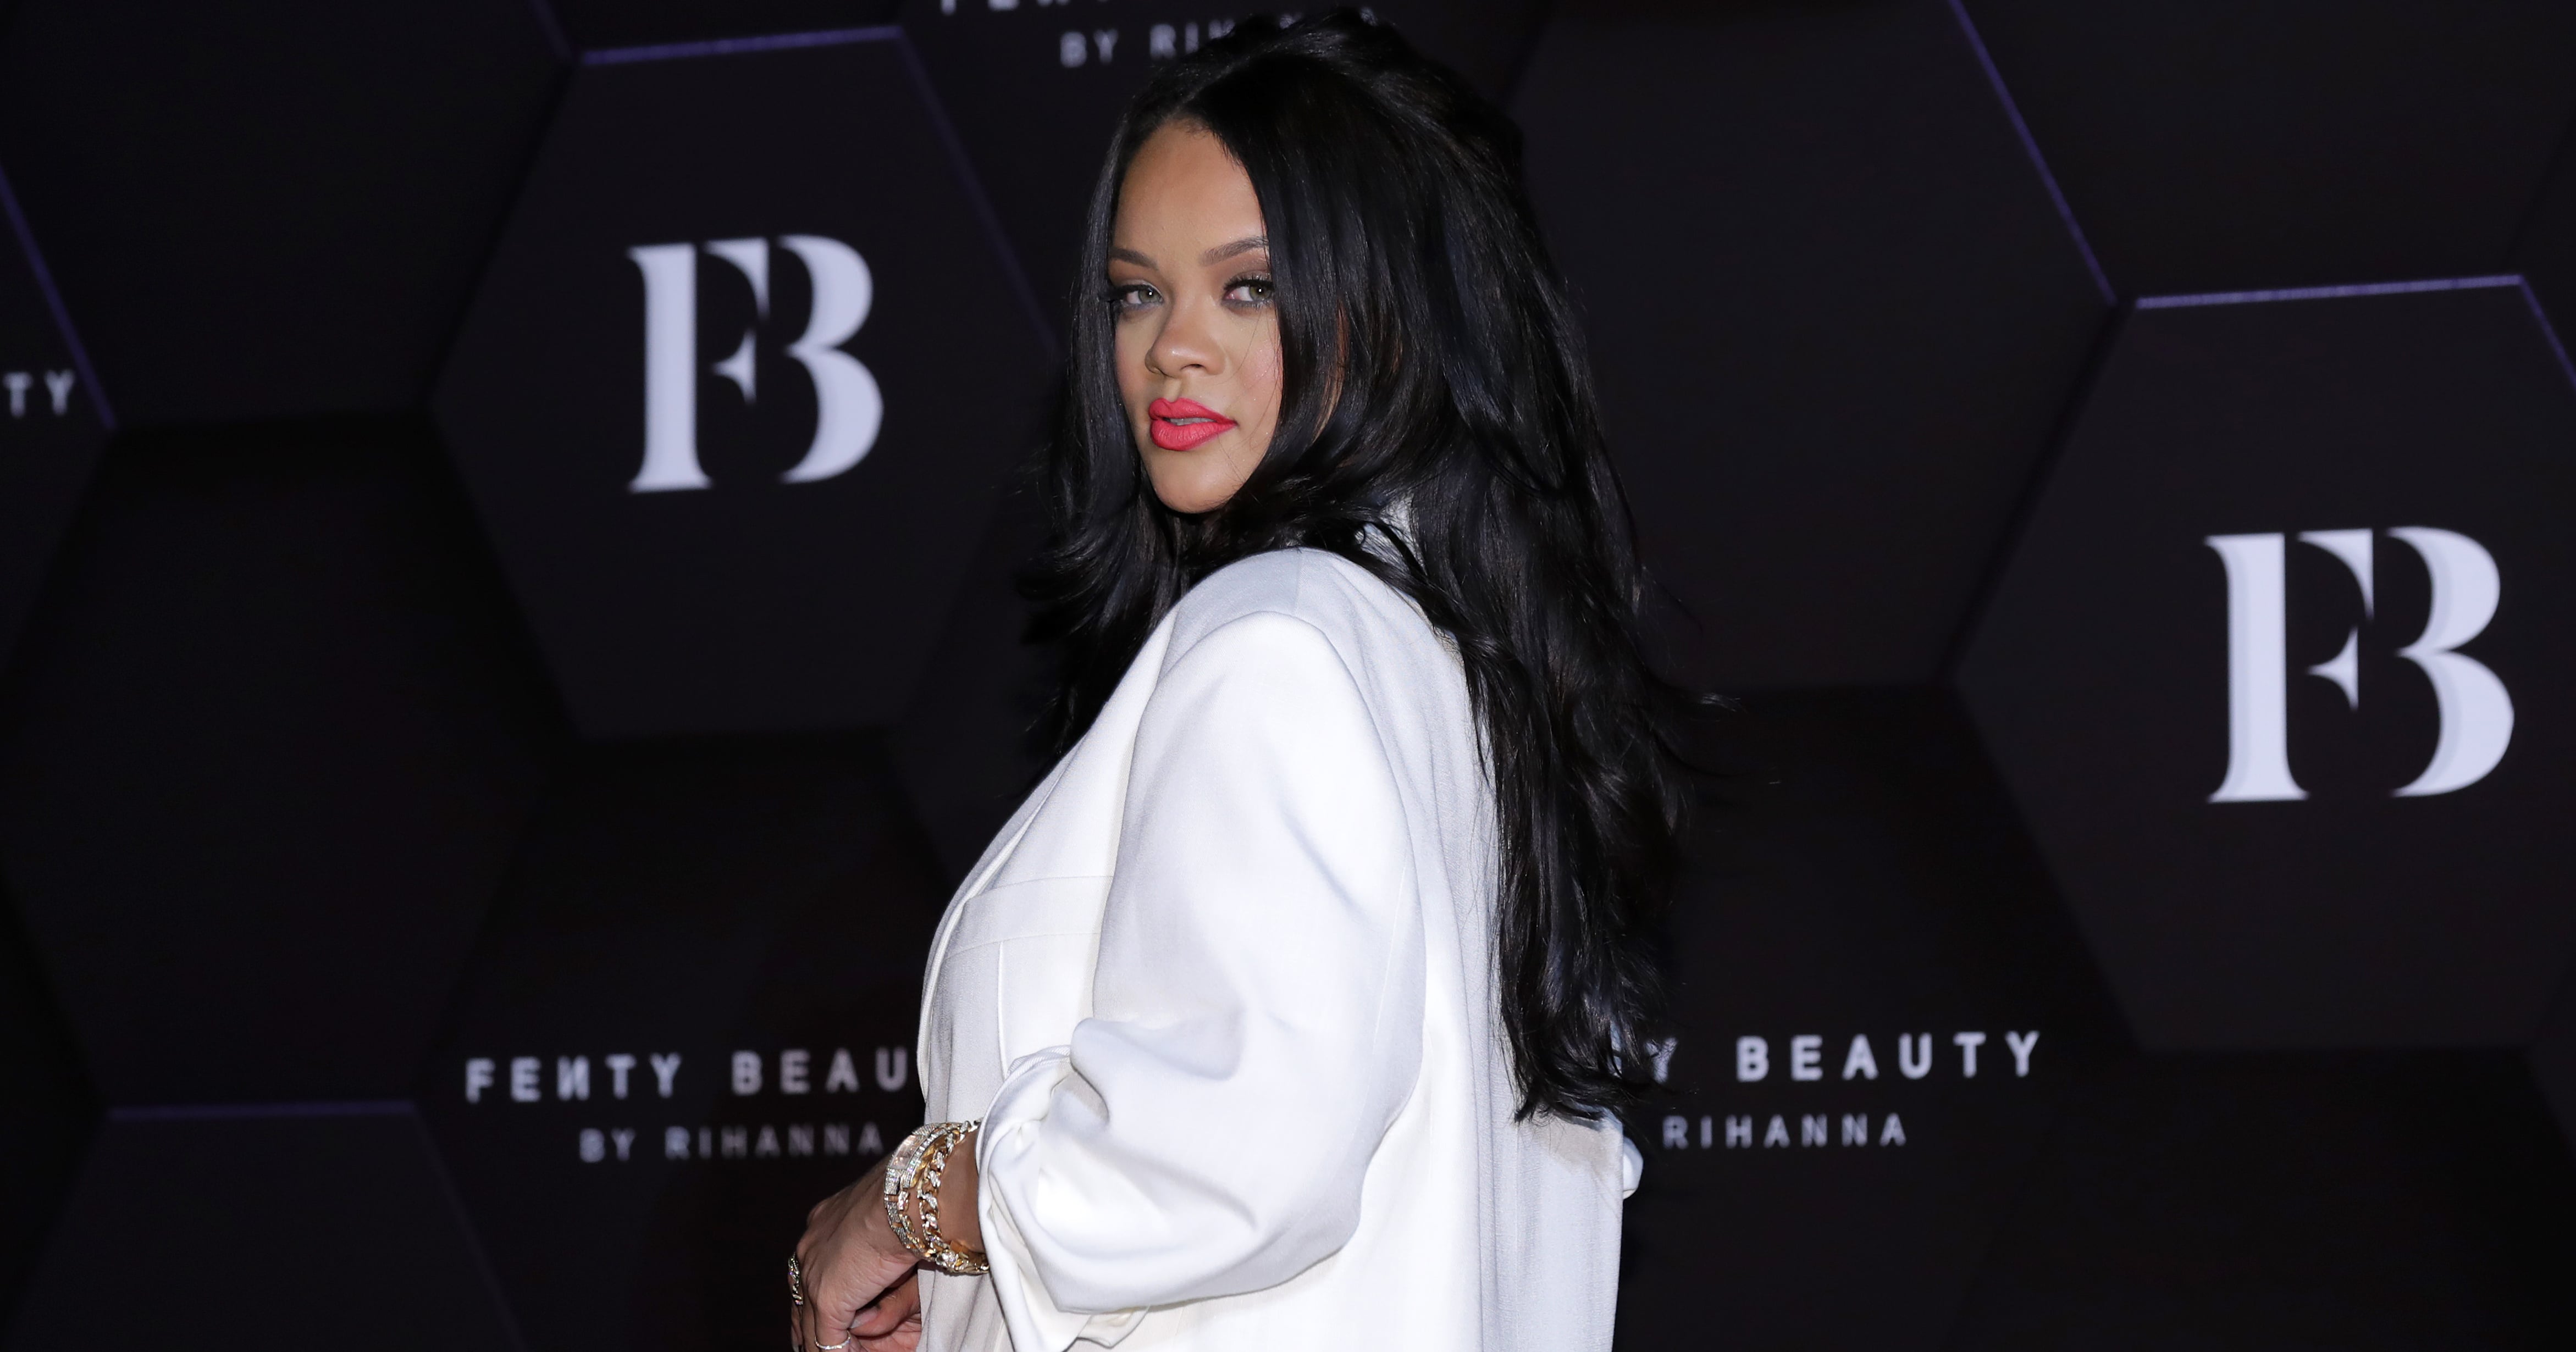 How Much Is Rihanna's Makeup Brand Fenty Beauty Worth?